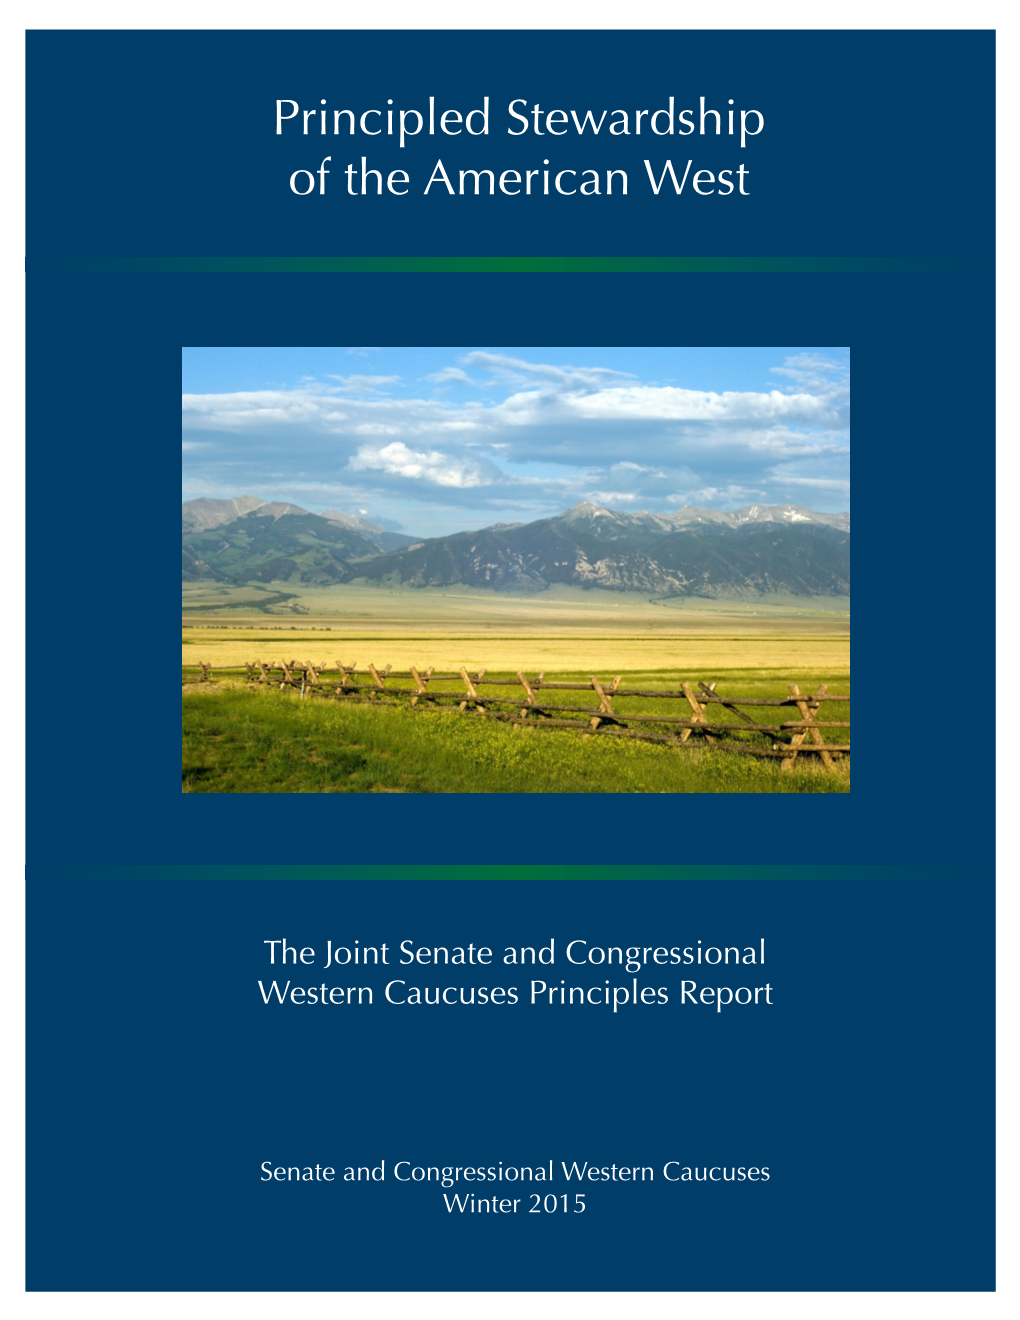 Joint Senate and Congressional Western Caucus Principles